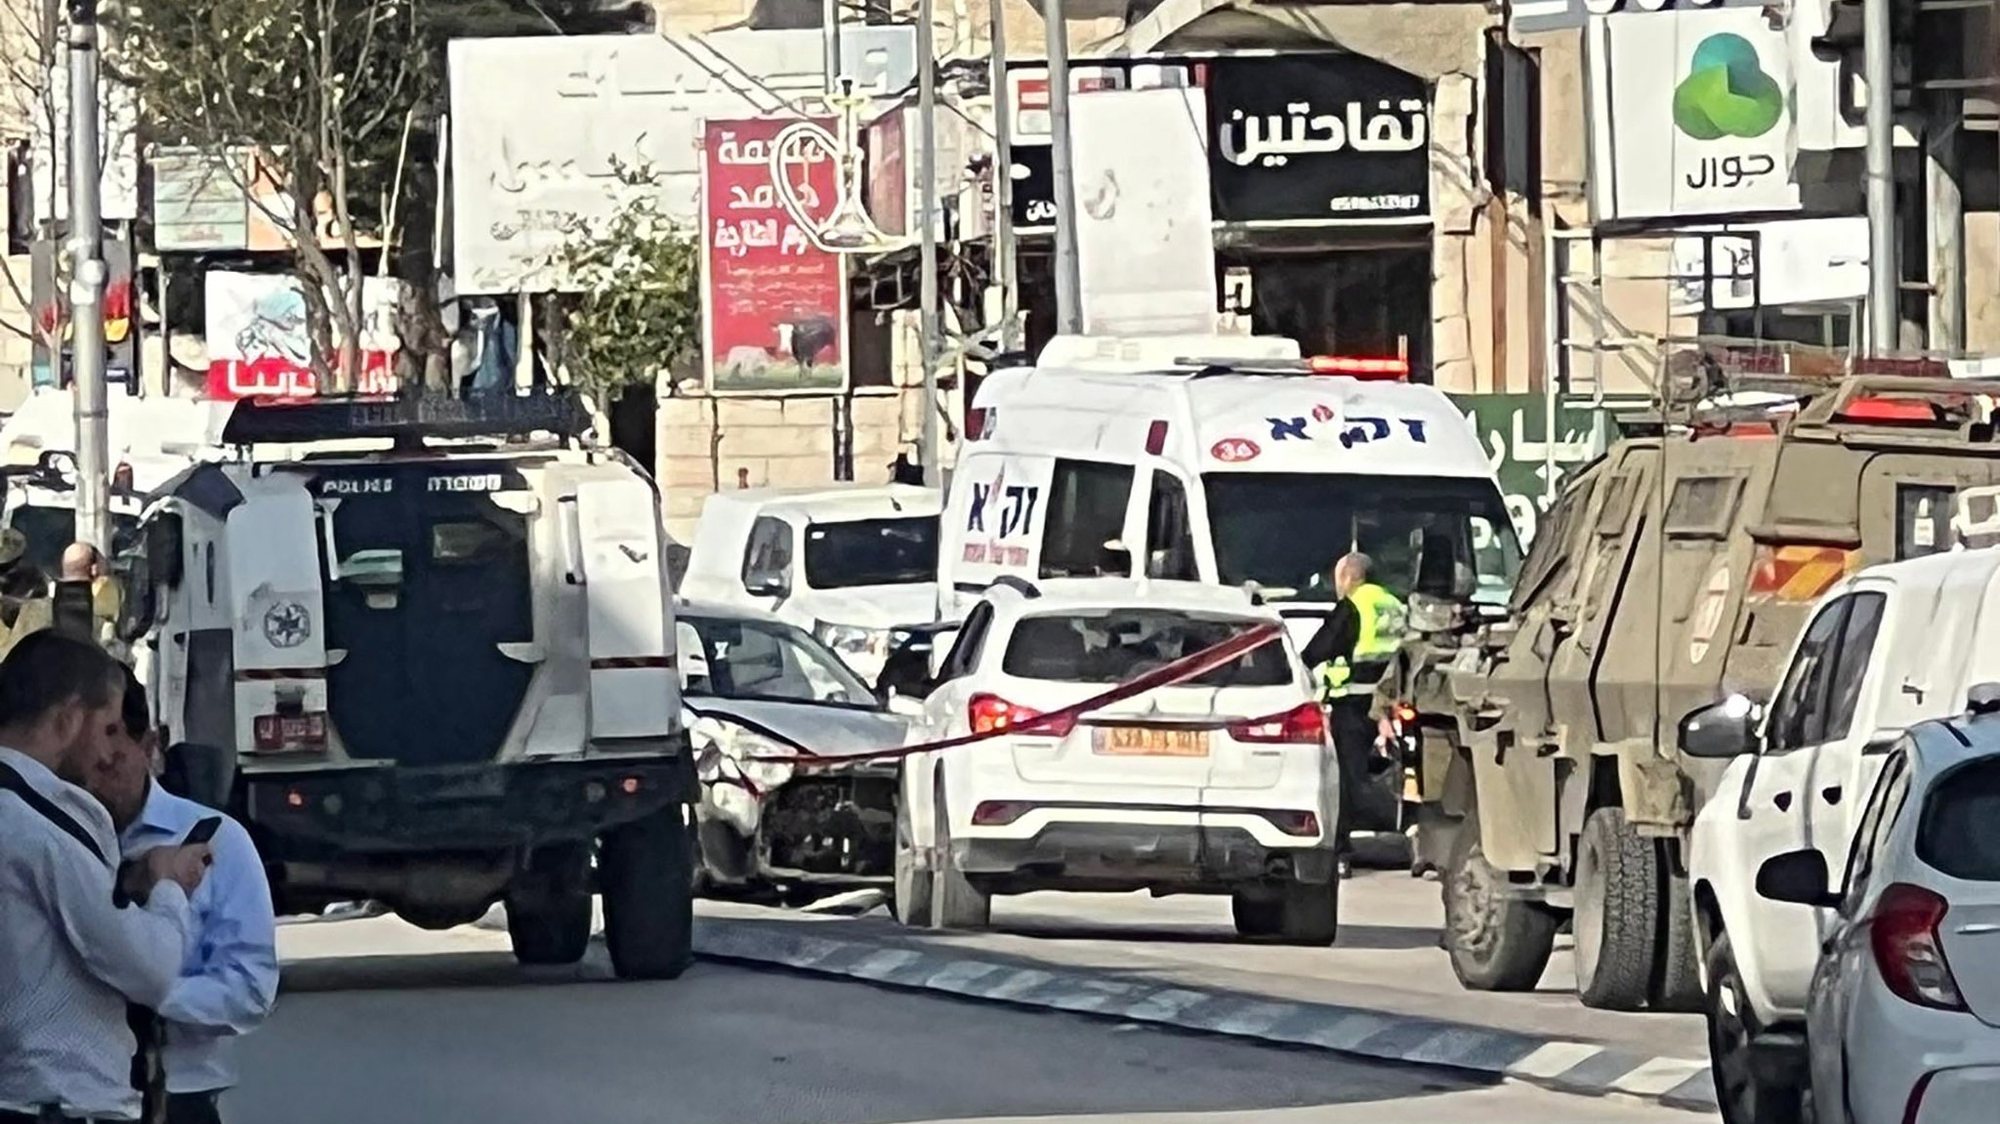 epa10492160 Israeli forces at the scene after a shooting attack in the West Bank town of Hawara, near the city of Nablus, 26 February 2023. The Israeli Defense Forces (IDF) said on 26 February that they blocked the area after an attacker opened fire toward an Israeli vehicle. As a result, two Israeli civilians were injured and evacuated to a hospital for further medical attention, the statement added.  EPA/STRINGER -- BEST QUALITY AVAILABLE